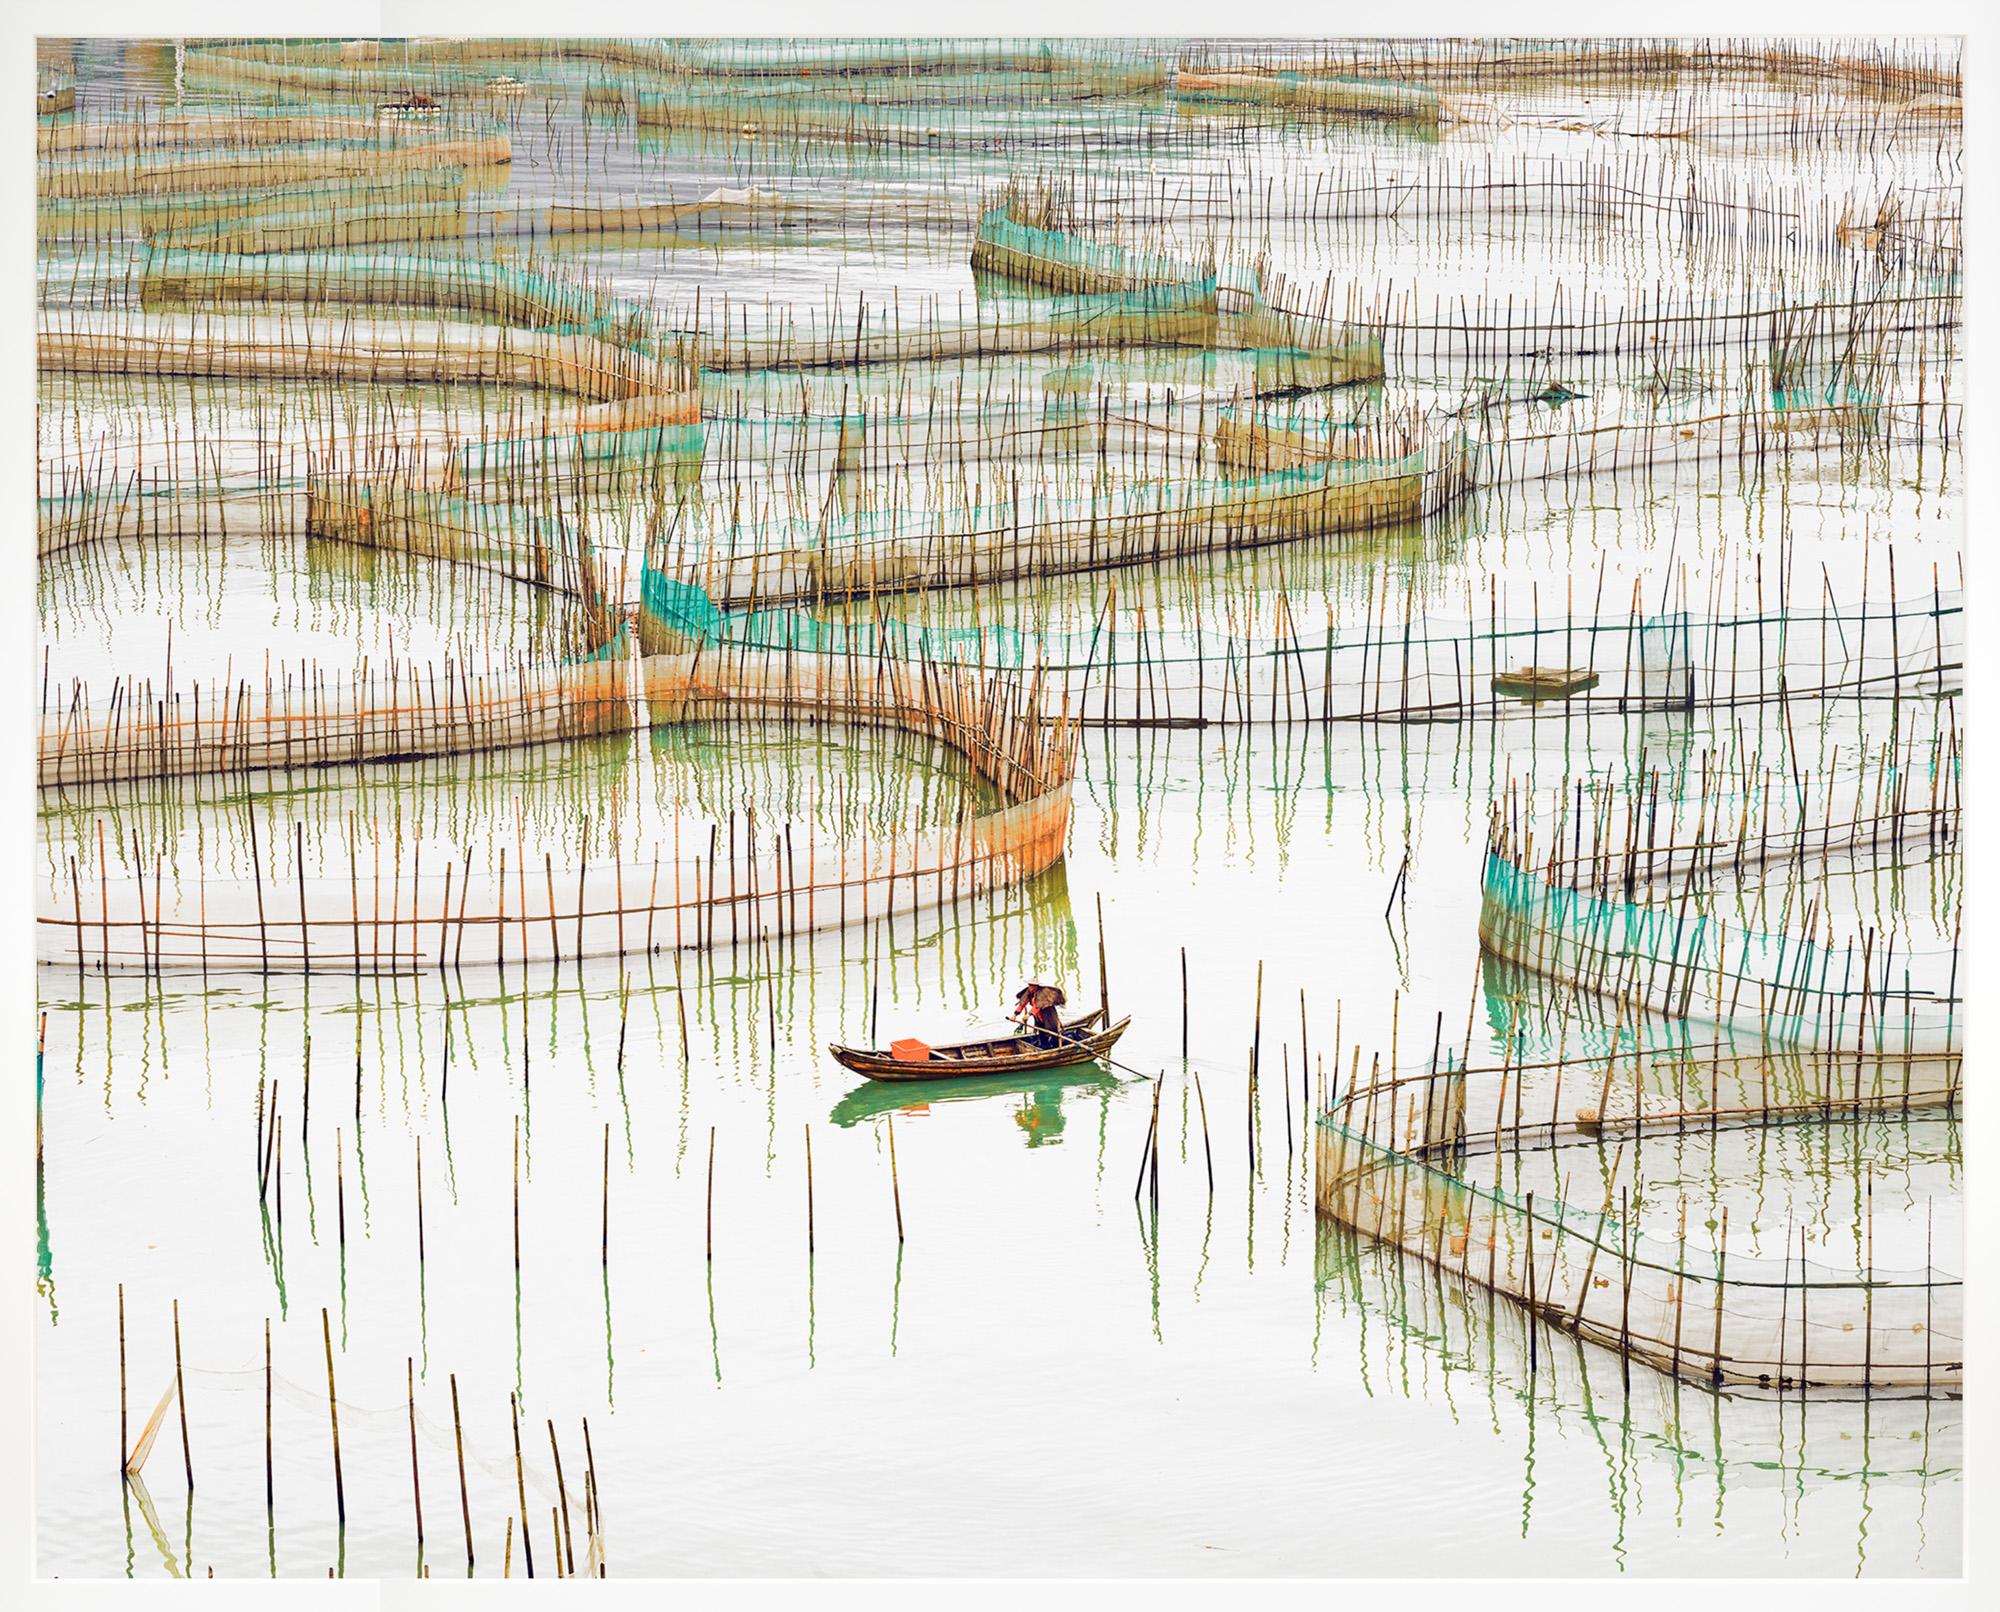 David Burdeny Landscape Photograph - "Nets Study 7" Contemporary Internationational Photograph on Paper with Frame